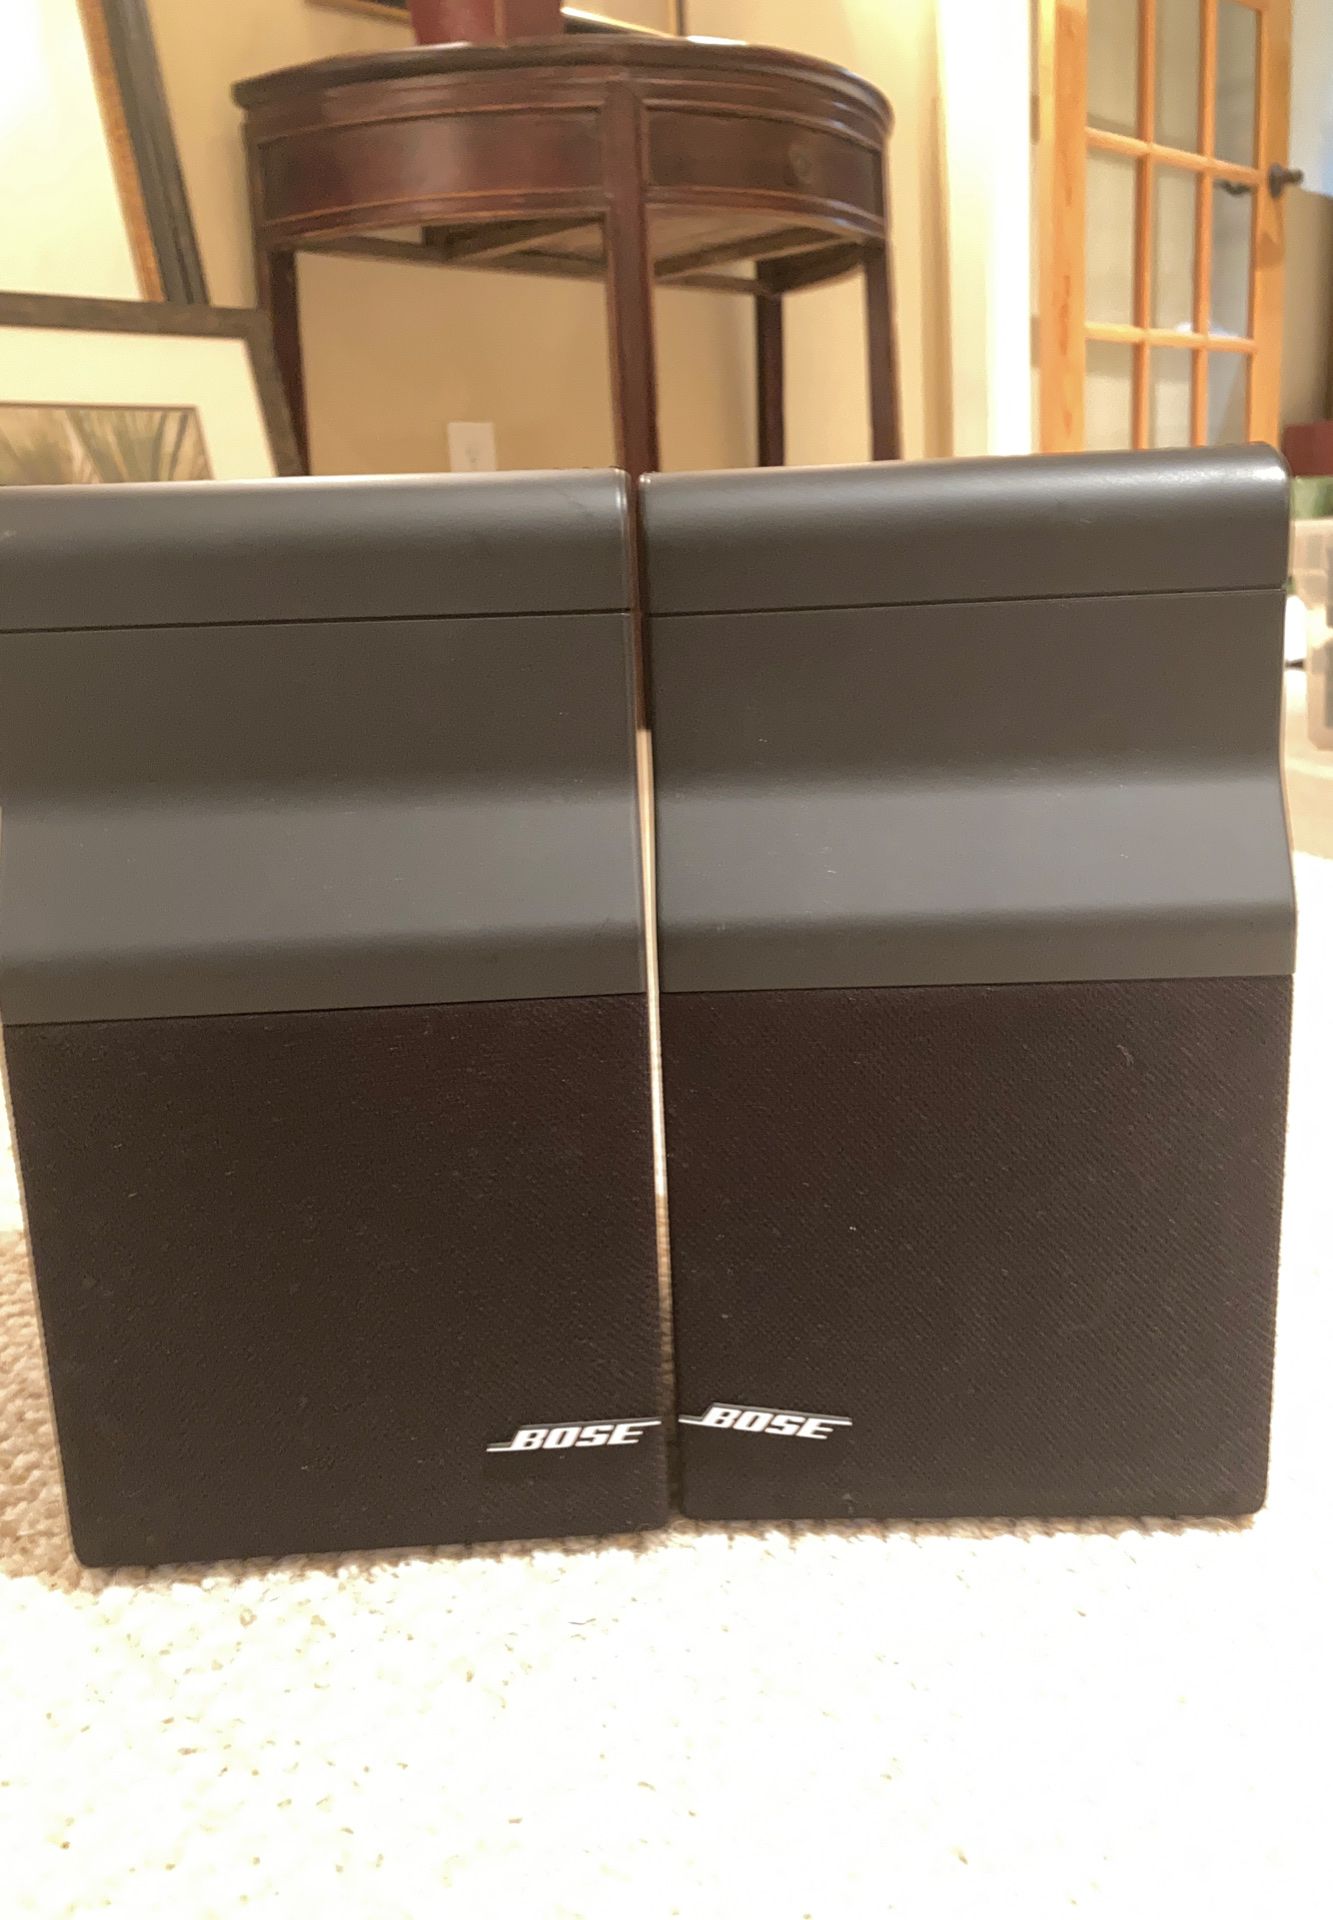 Bose freestyle speakers